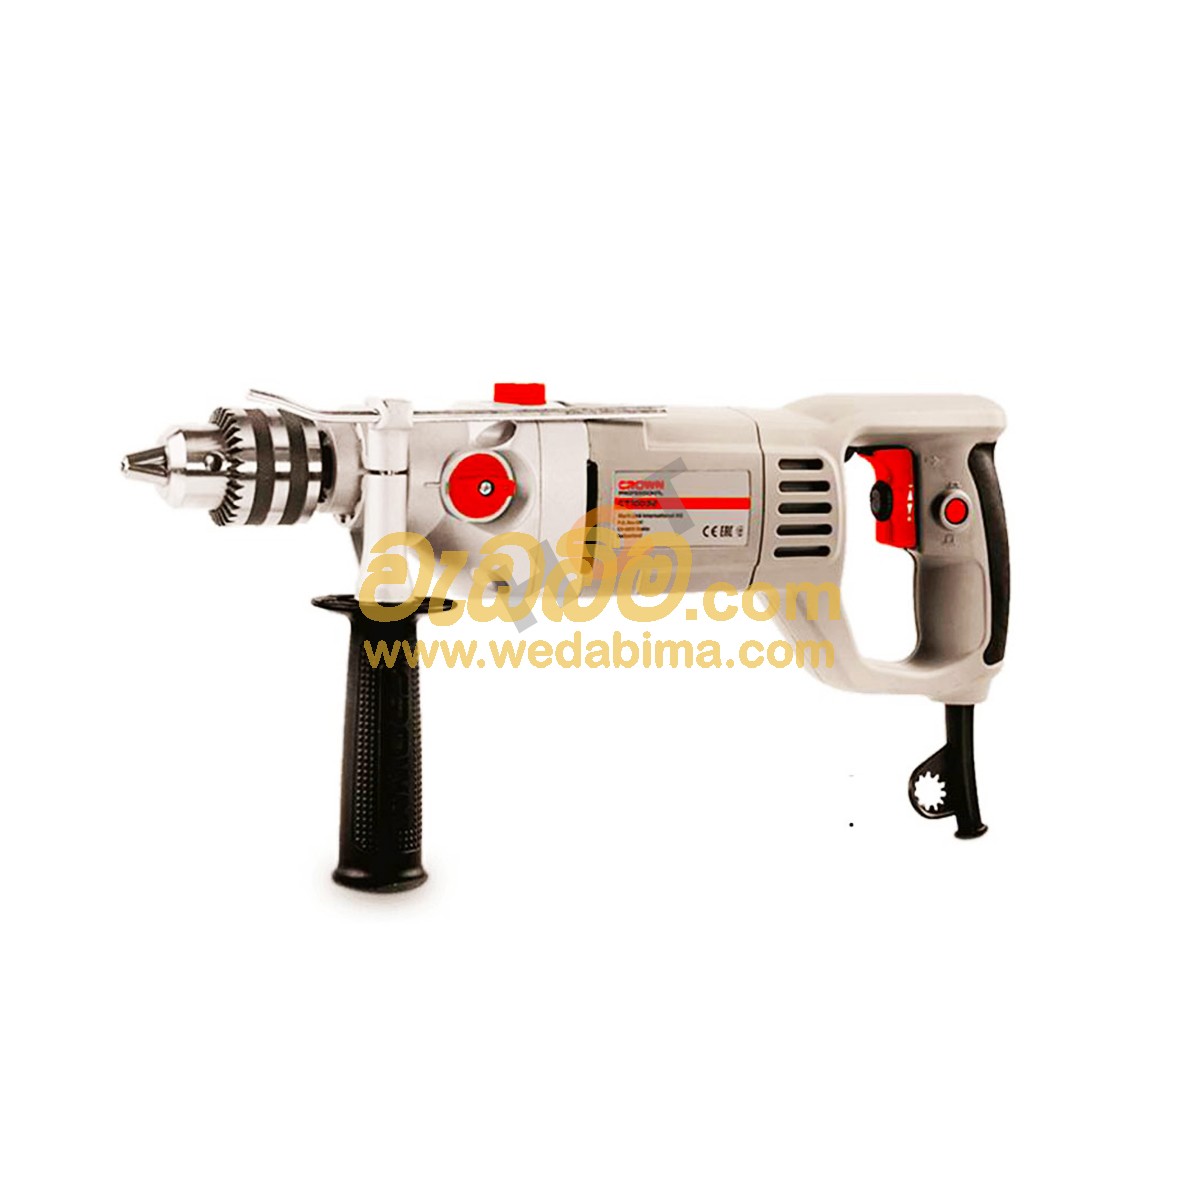 CROWN IMPACT DRILL 1050W 16MM